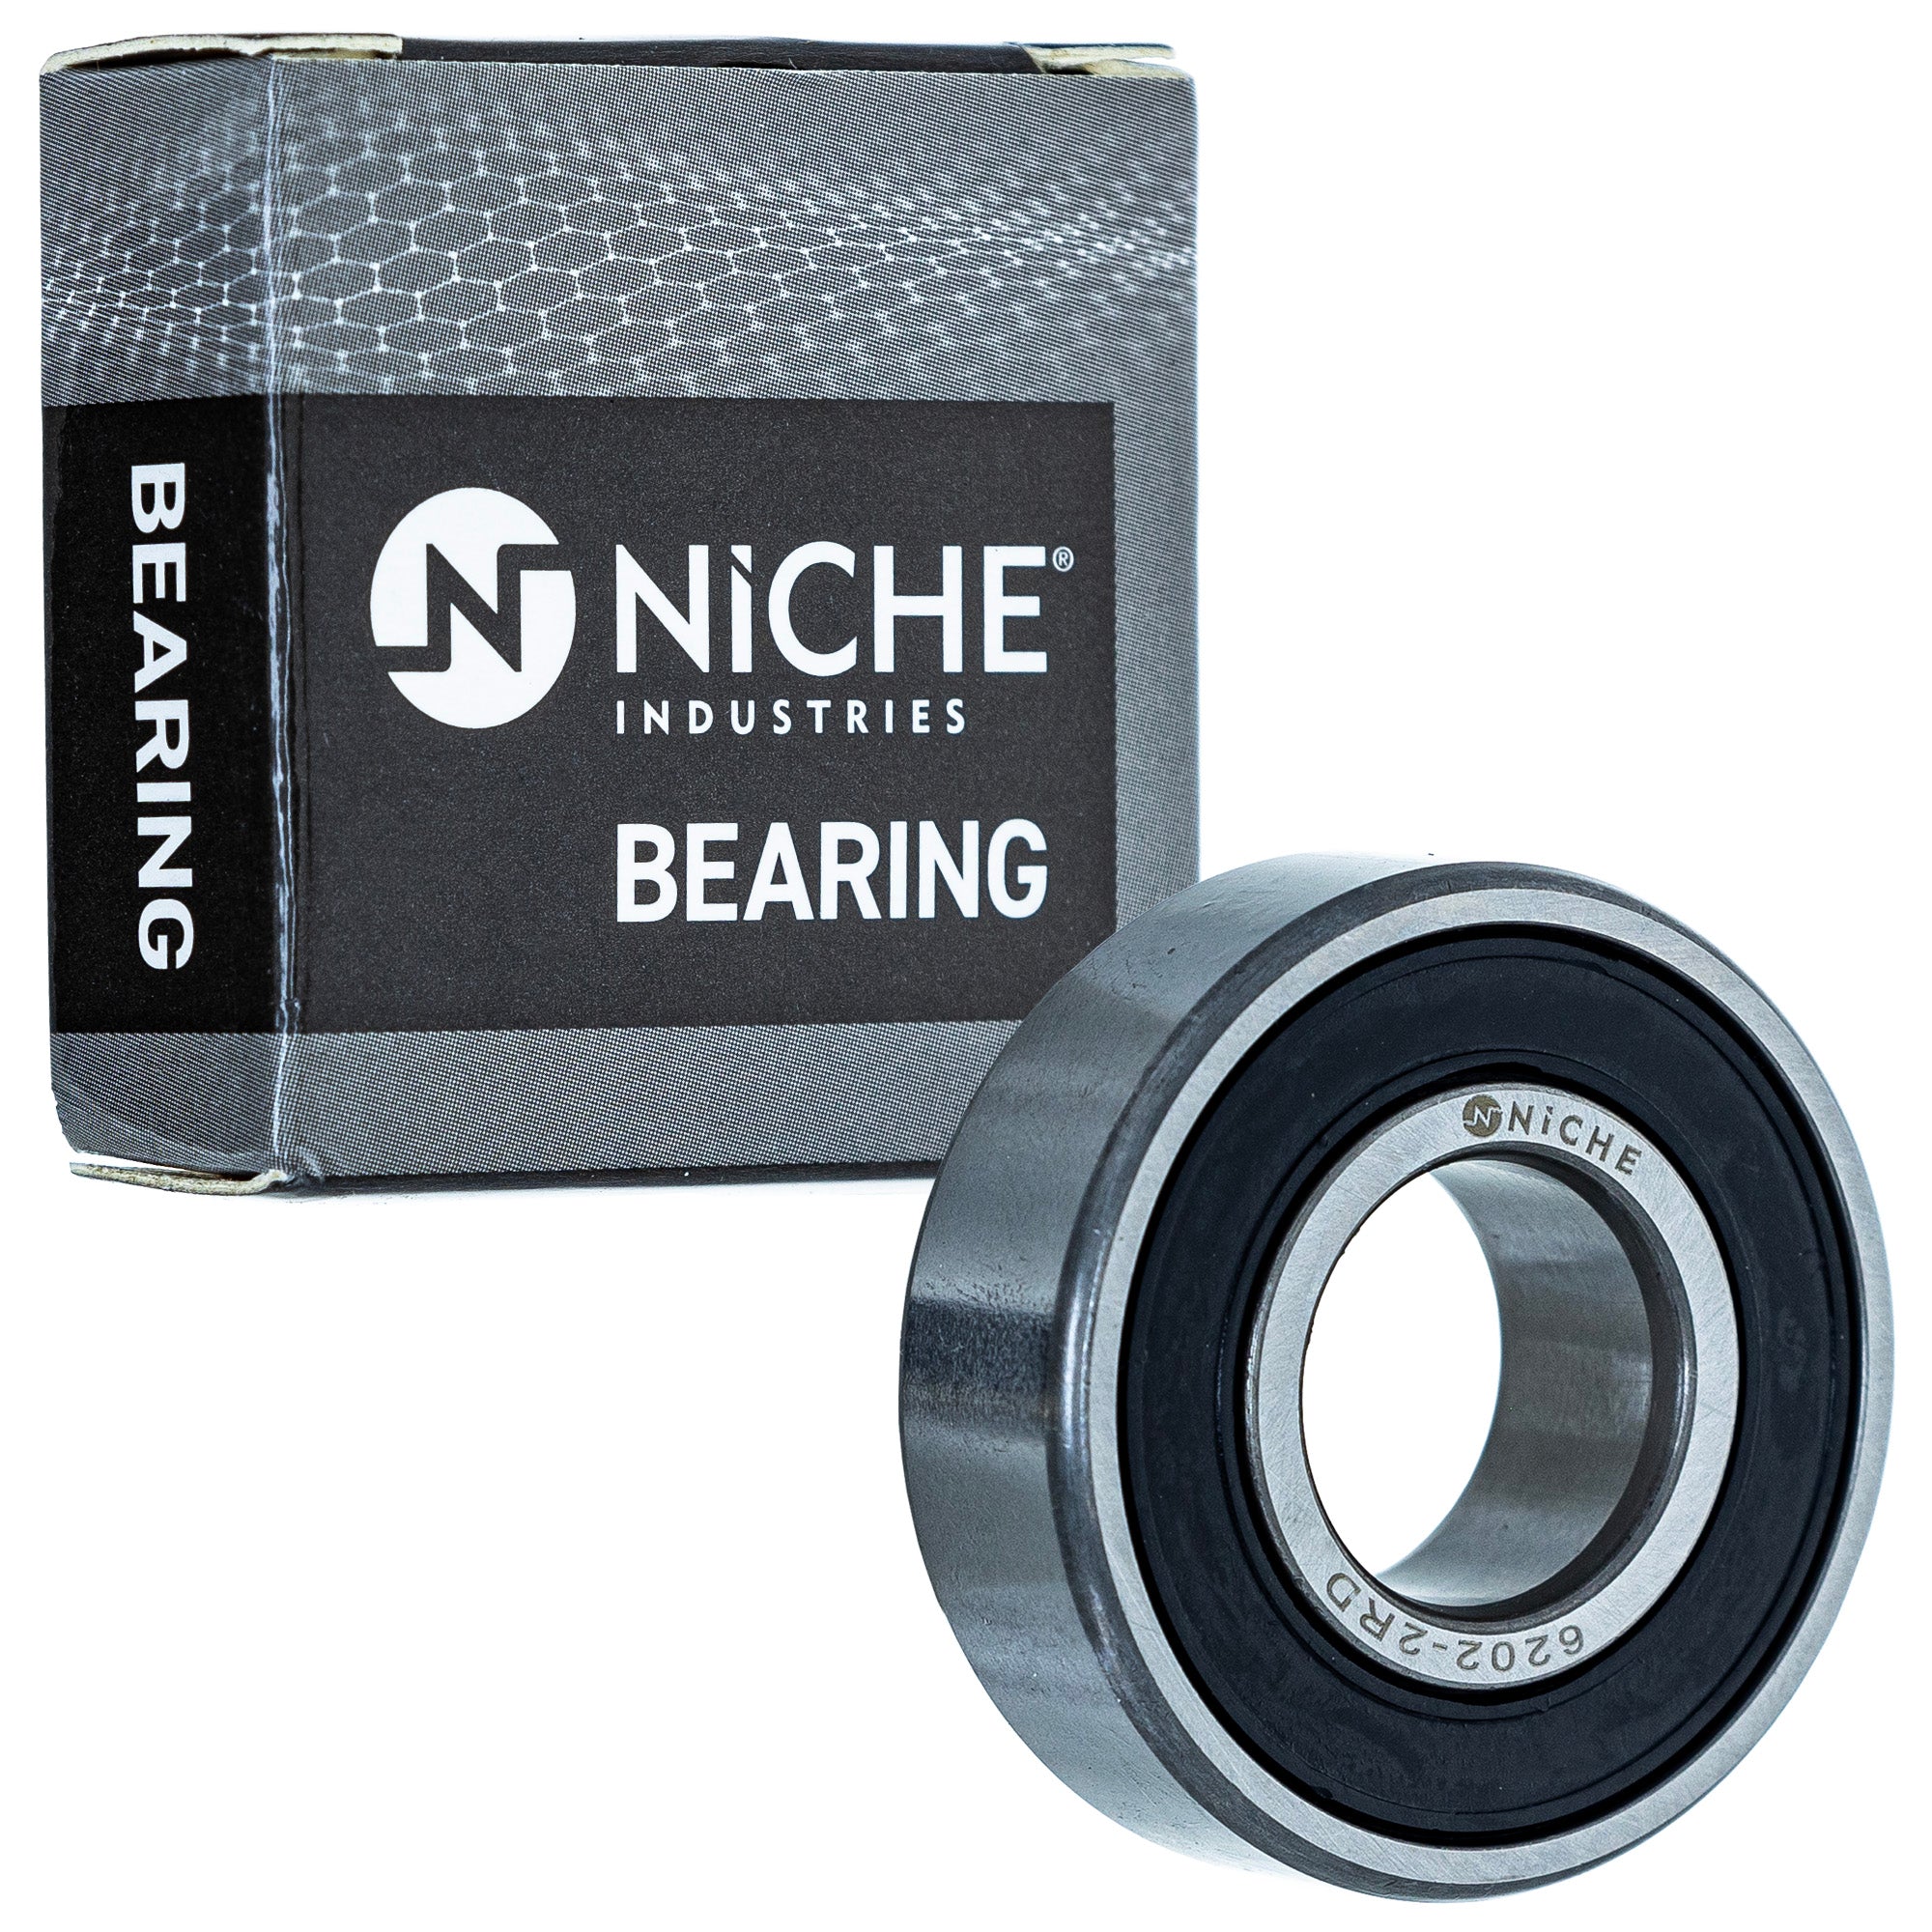 NICHE 519-CBB2252R Bearing for zOTHER Xplorer Xpedition Worker